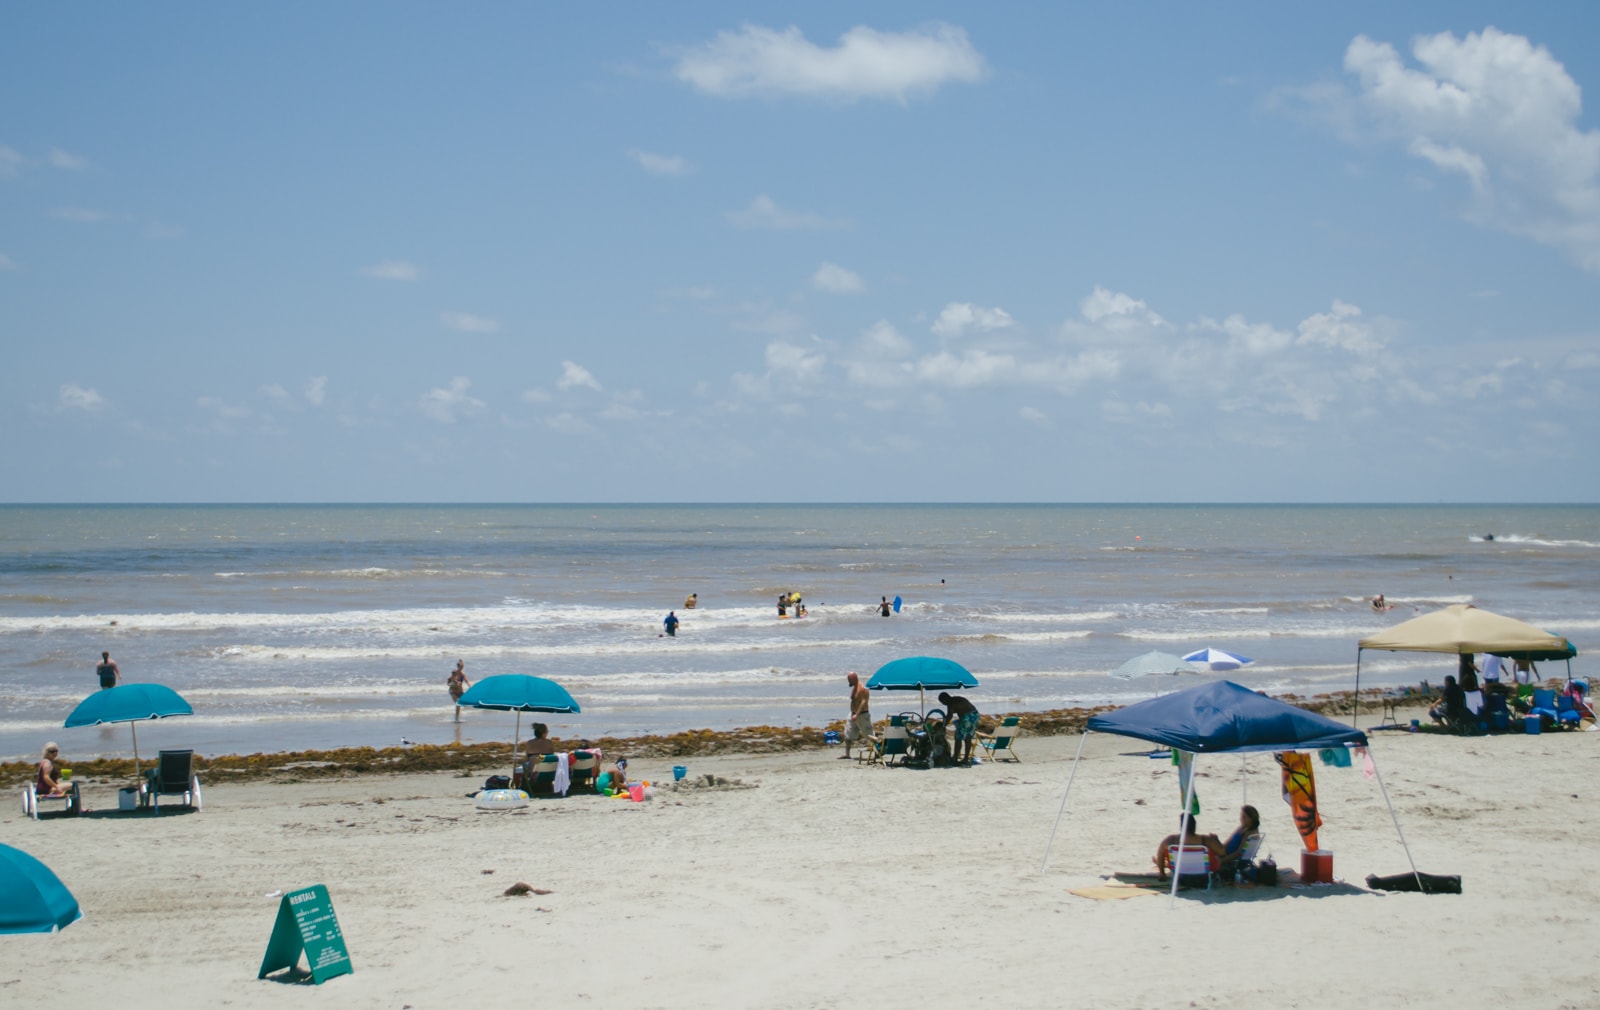 People enjoying a day at the beach in Galveston